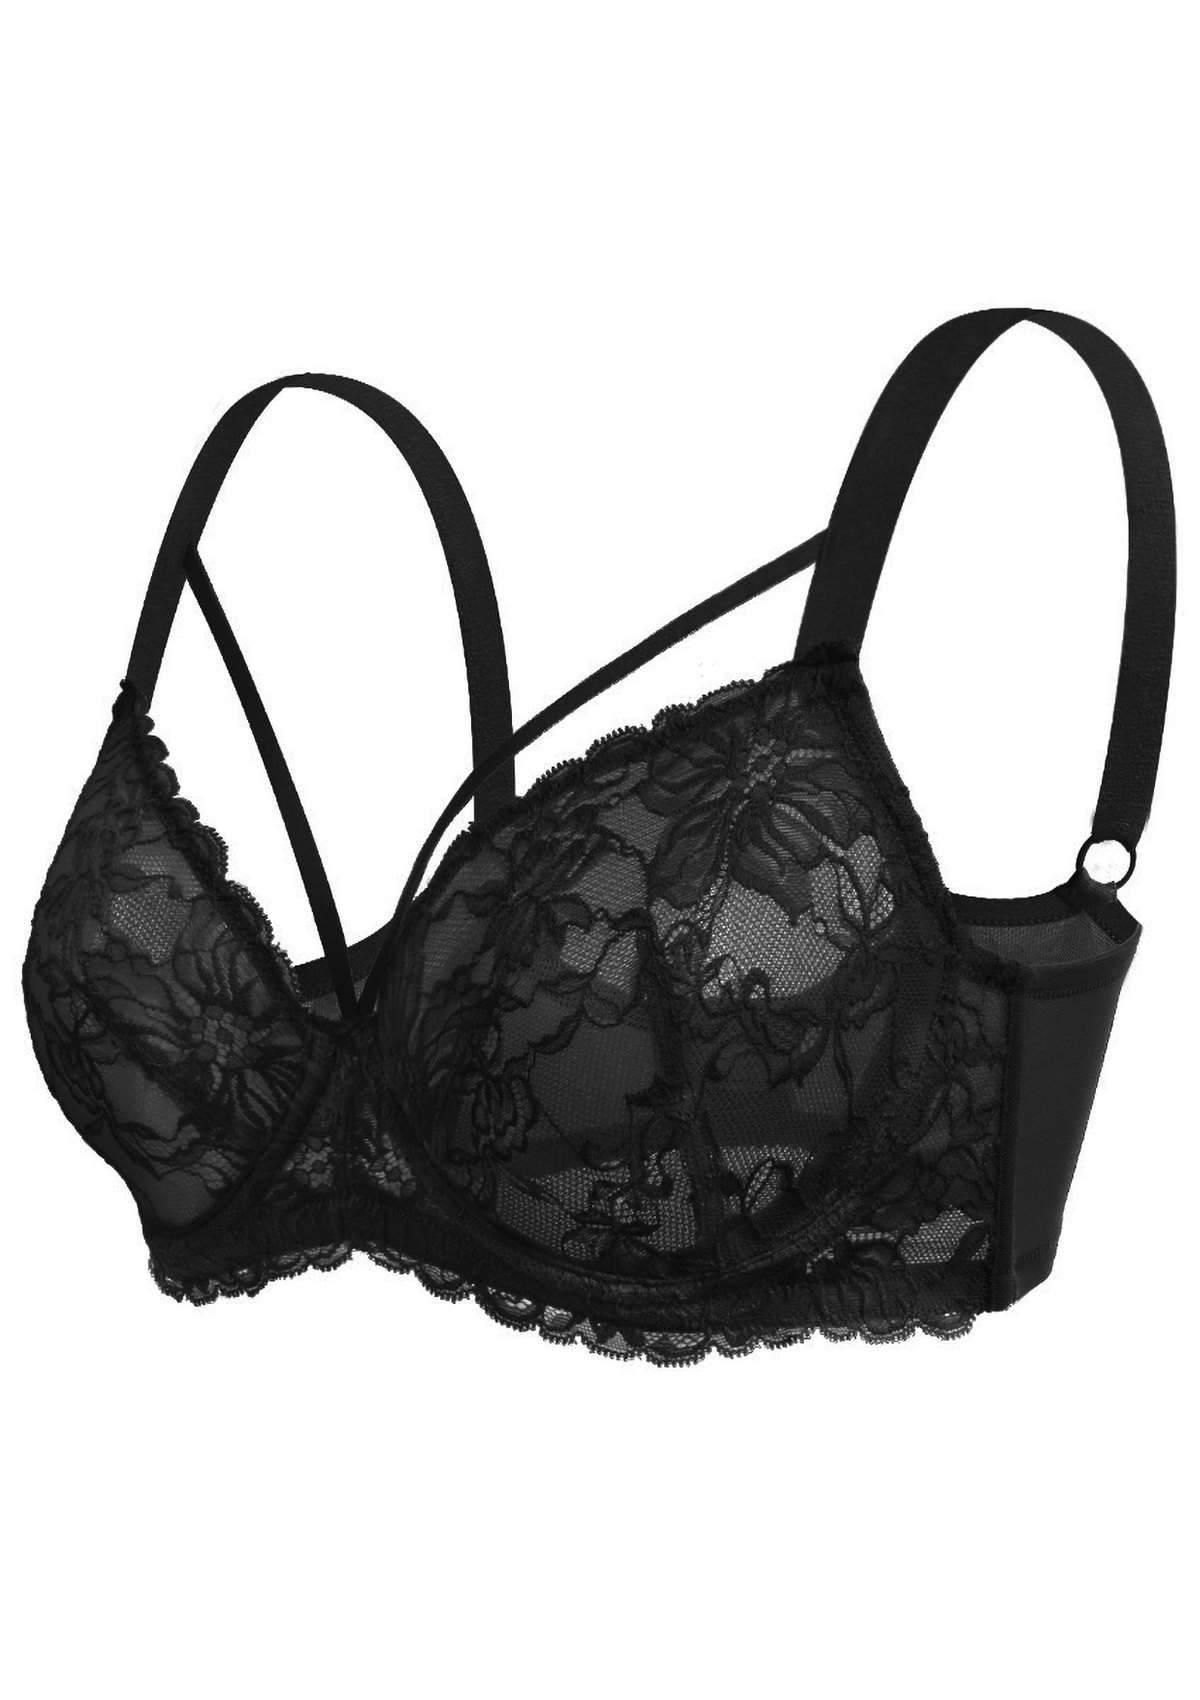 HSIA Pretty In Petals Bra - Plus Size Lingerie For Comfrot And Support - Black / 46 / C